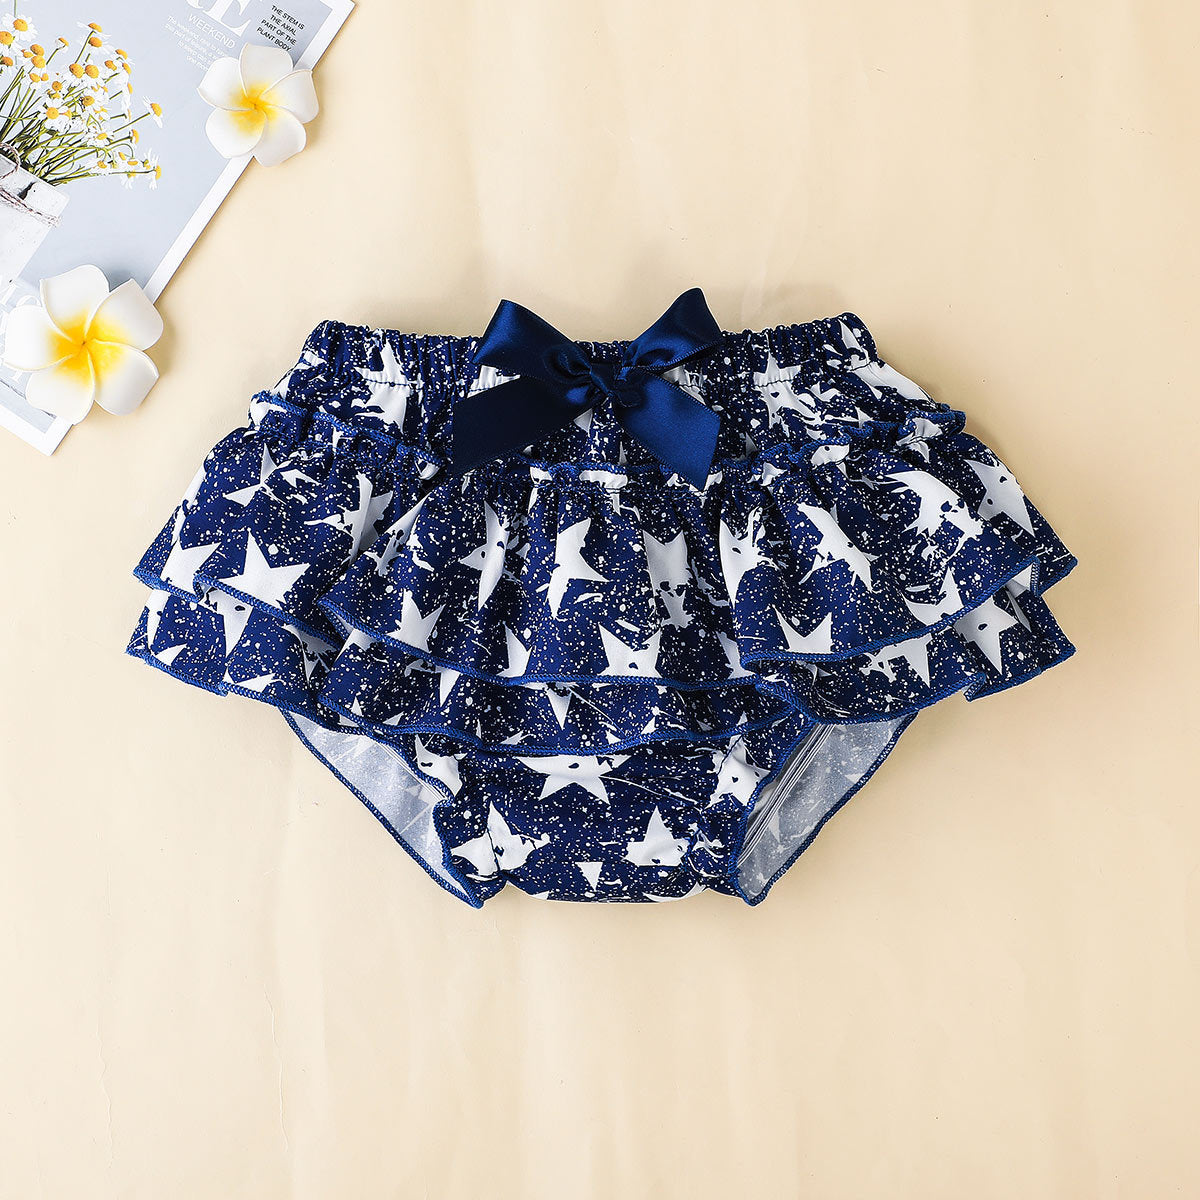 Baby Independence Day Suits